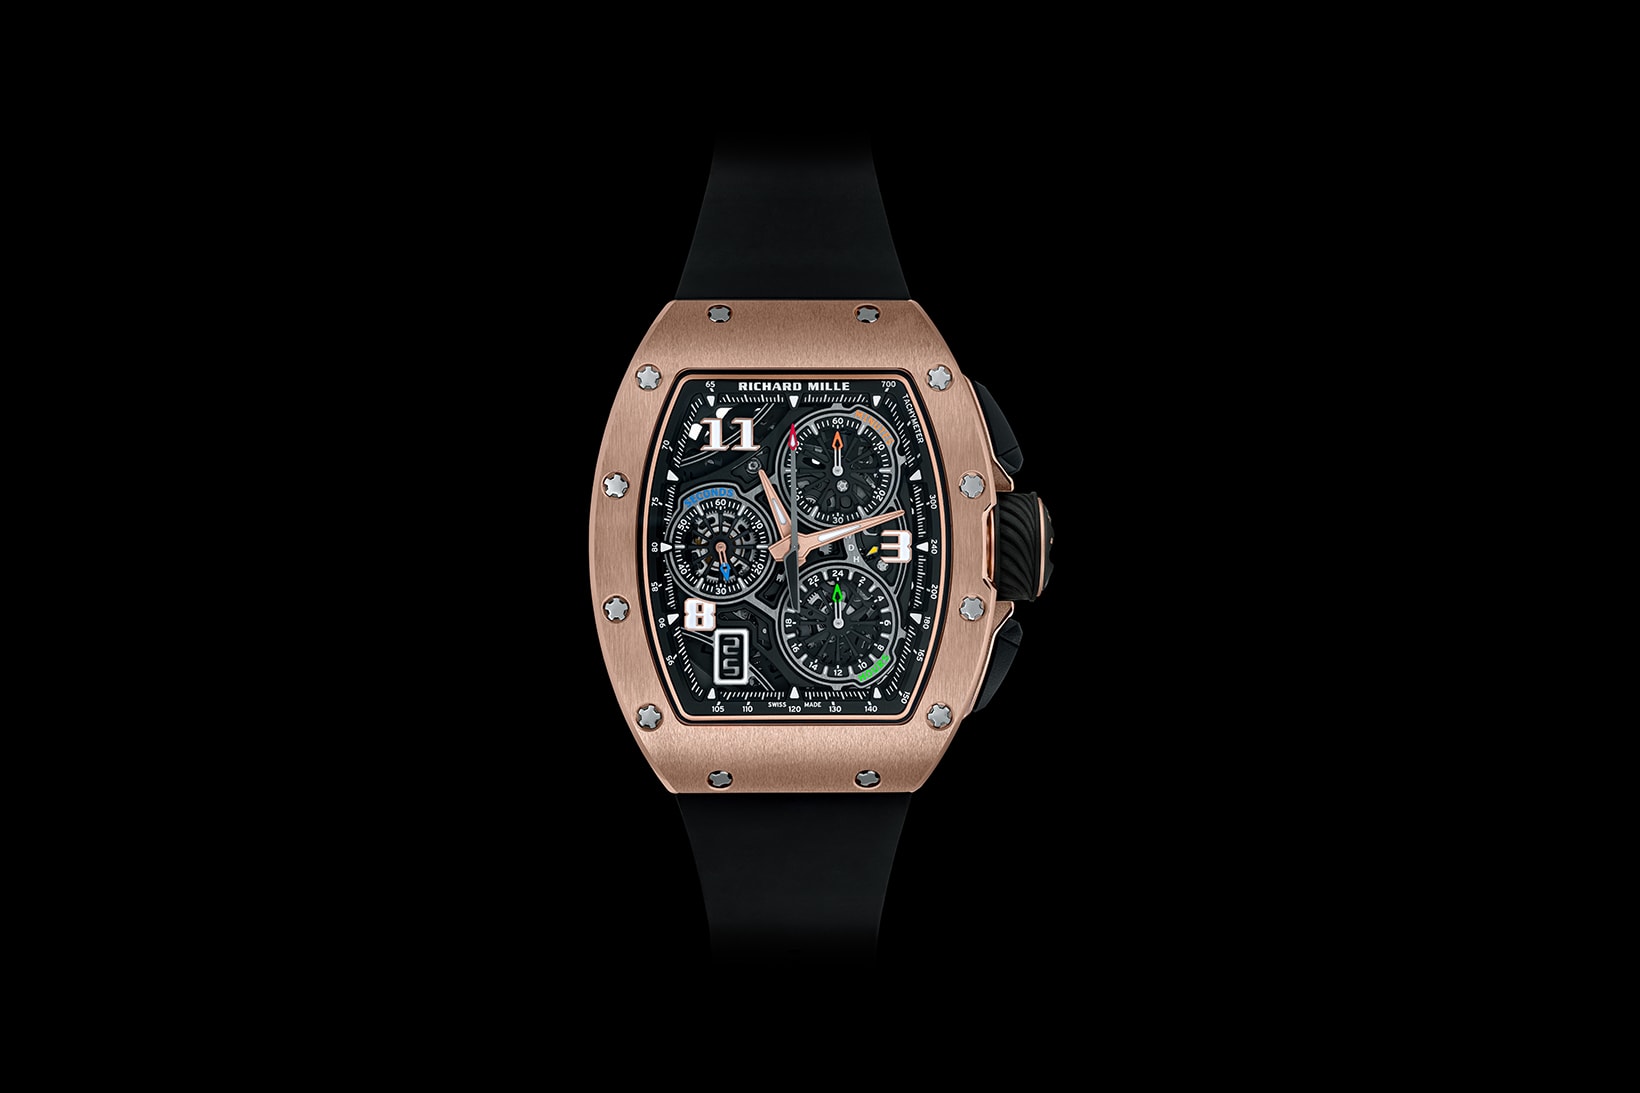 Richard Mille Announces RM 72-01 Lifestyle Automatic Chronograph Swiss Watchmaking Luxury Timepiece 